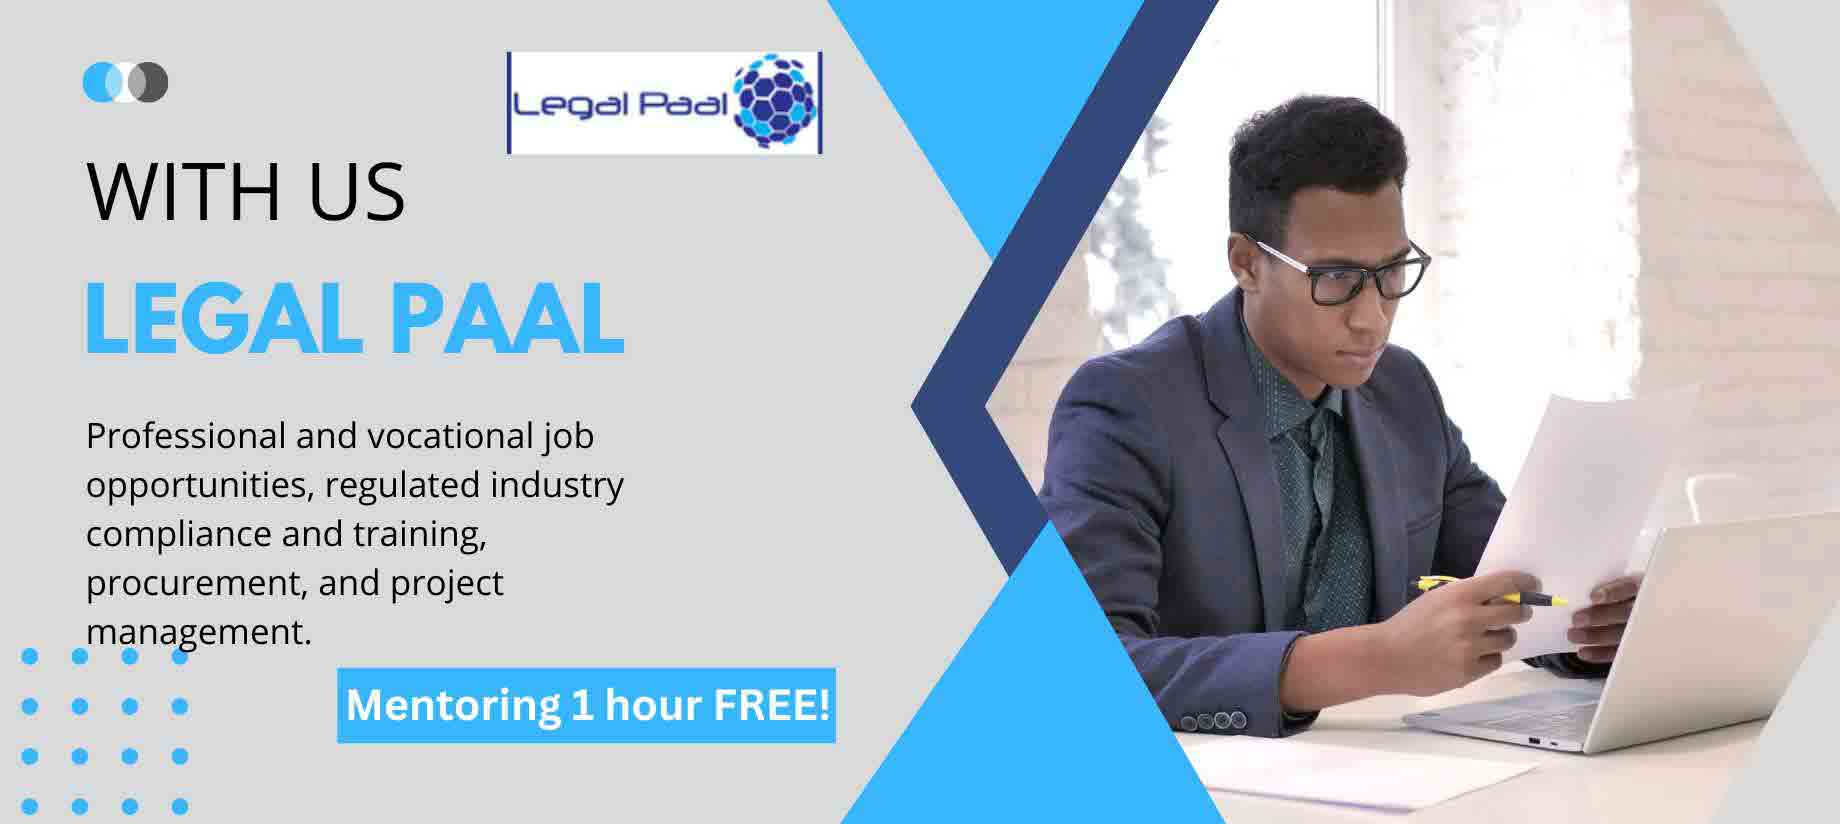 Mentoring 1 hour FREE! - Banner Image on Legal Paal